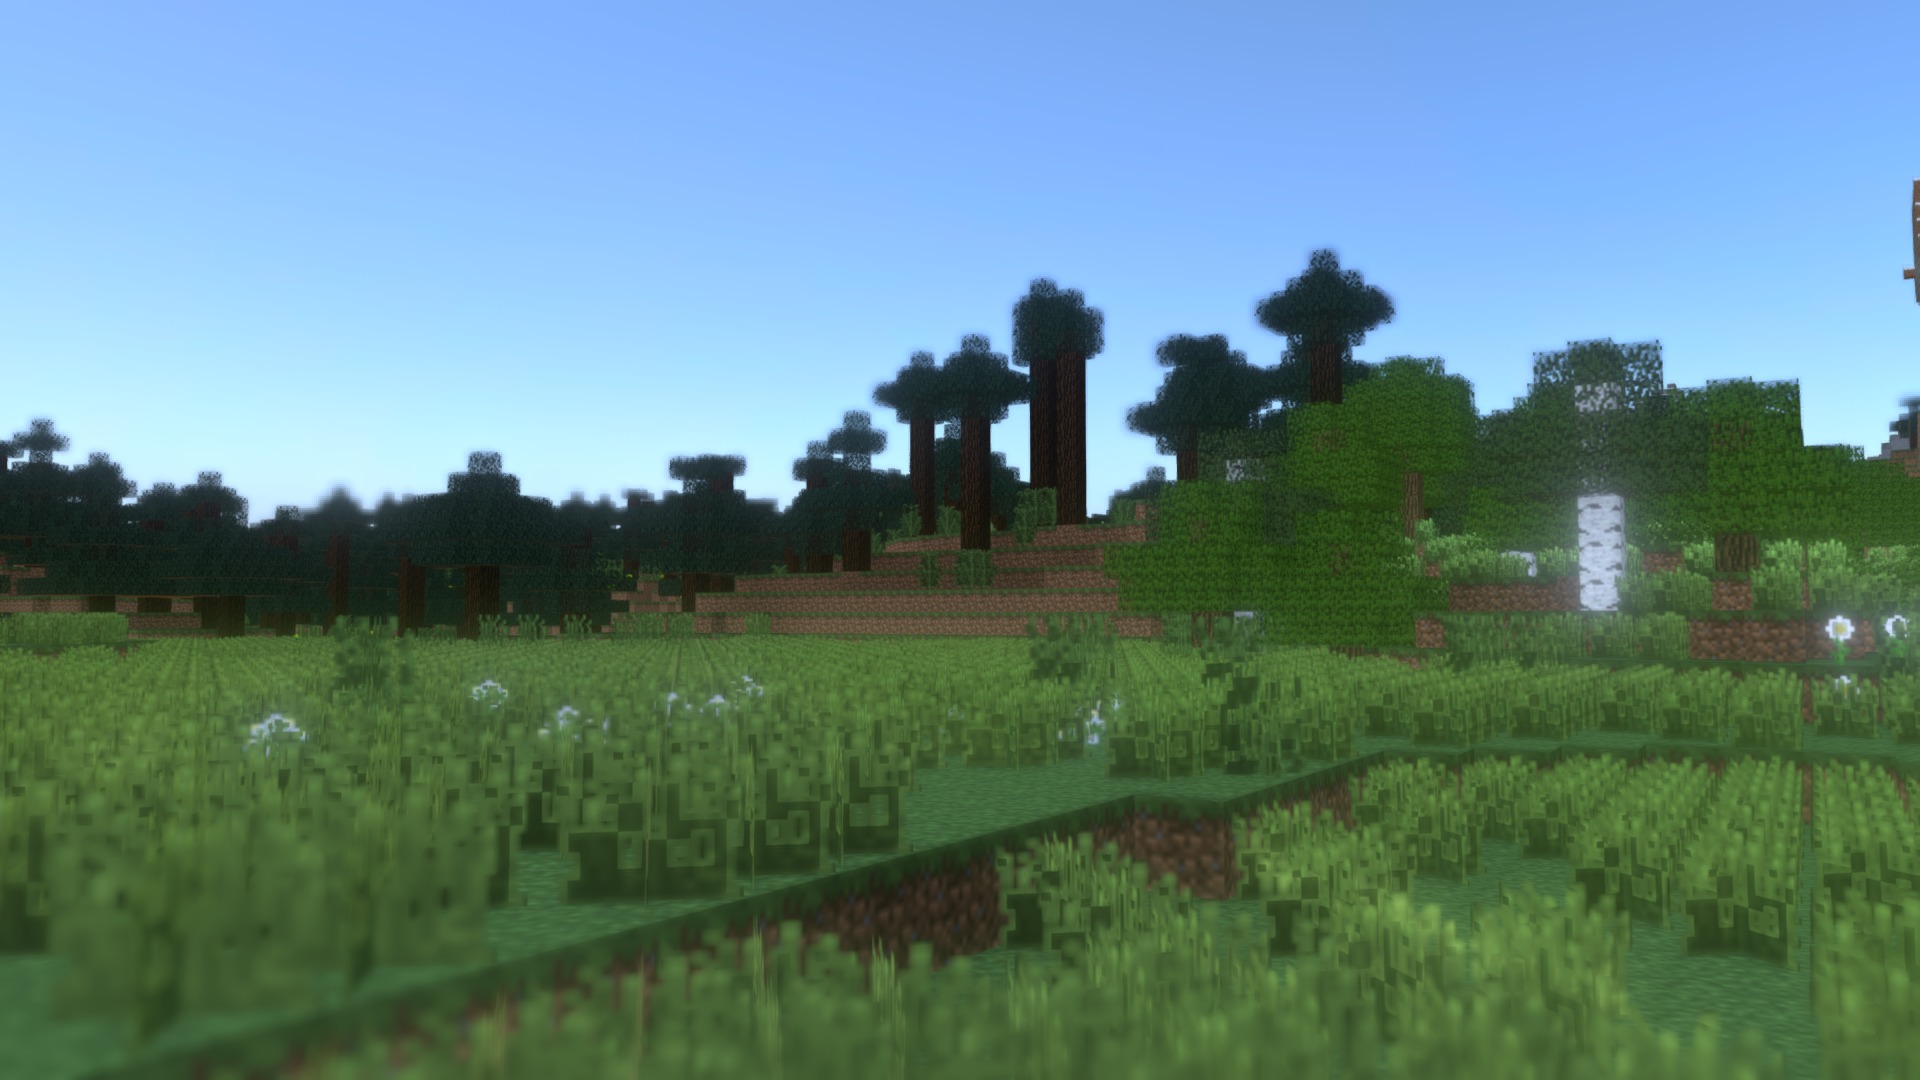 3D model Minecraft terrain – Forest with river - This is a 3D model of the Minecraft terrain - Forest with river. The 3D model is about a field of grass with trees in the background.